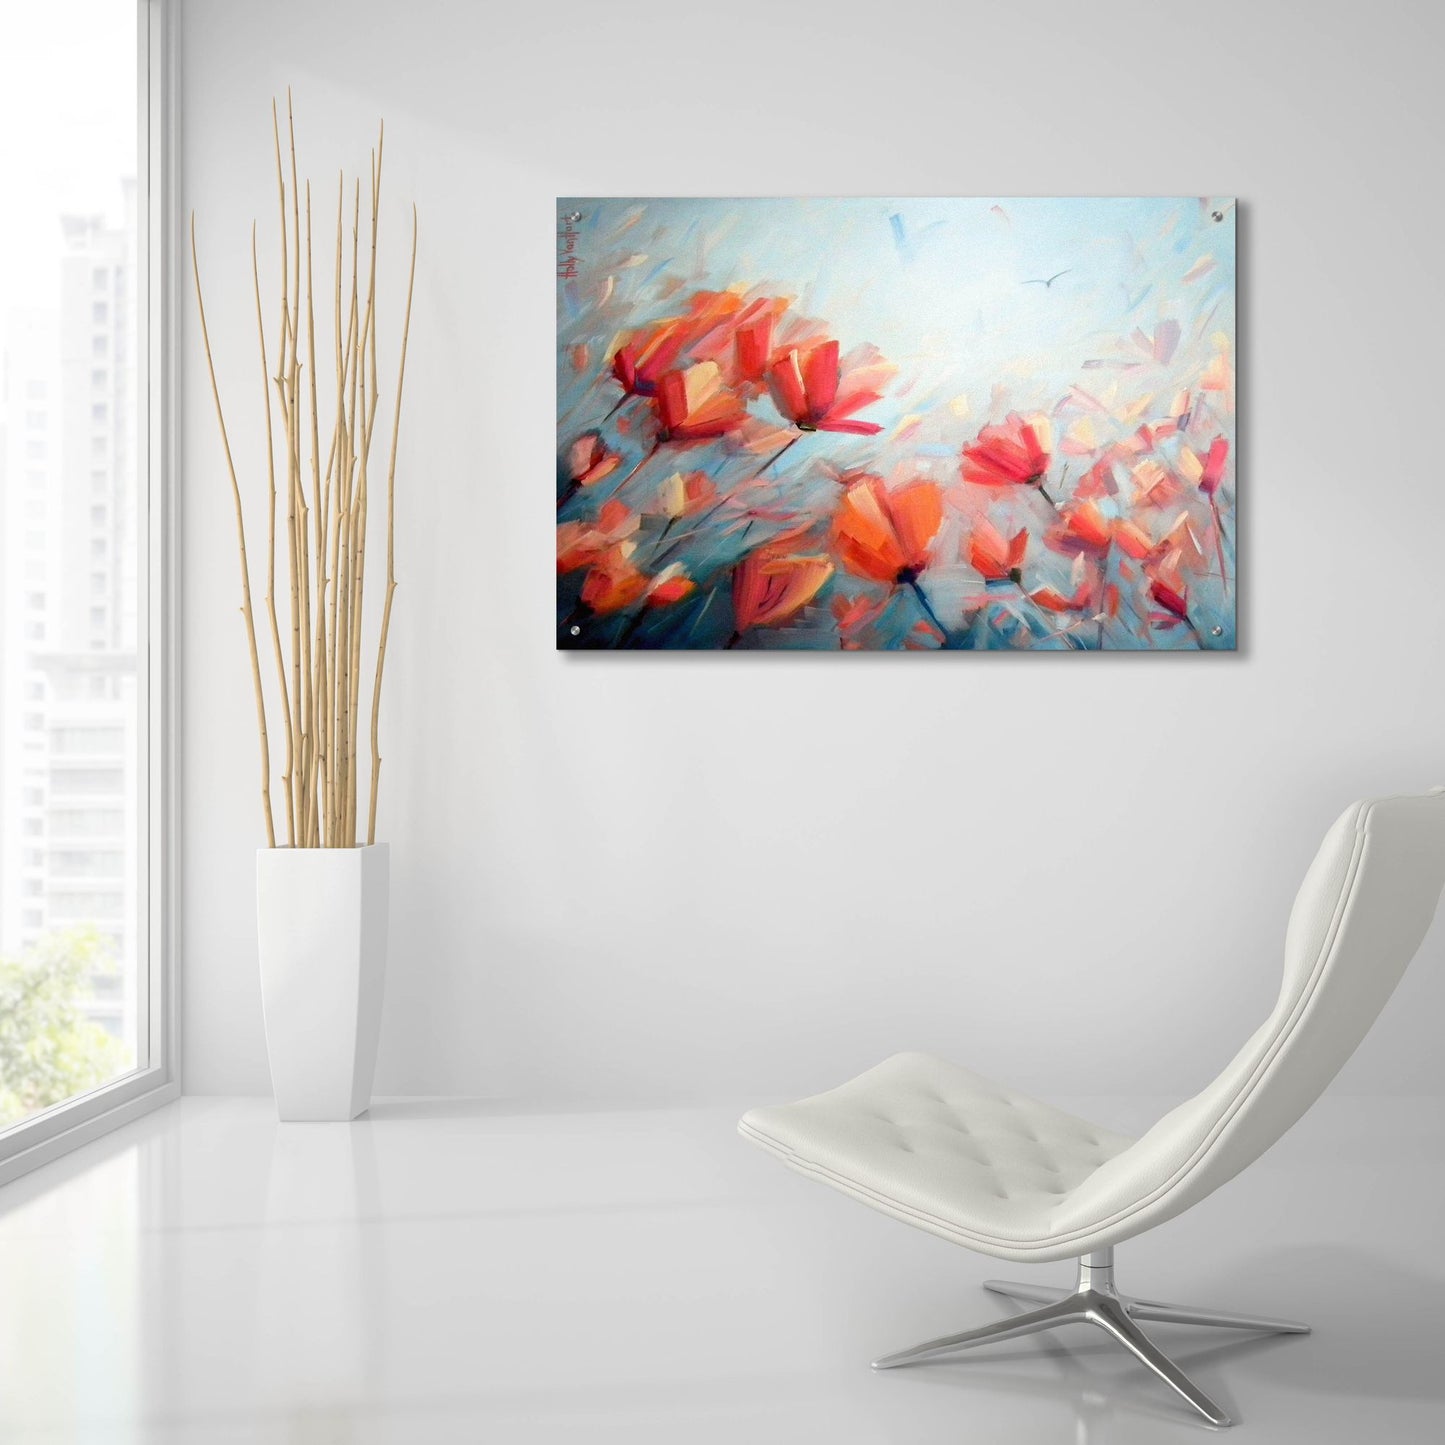 Epic Art 'Dreaming In Full Color' by Holly Van Hart, Acrylic Glass Wall Art,36x24